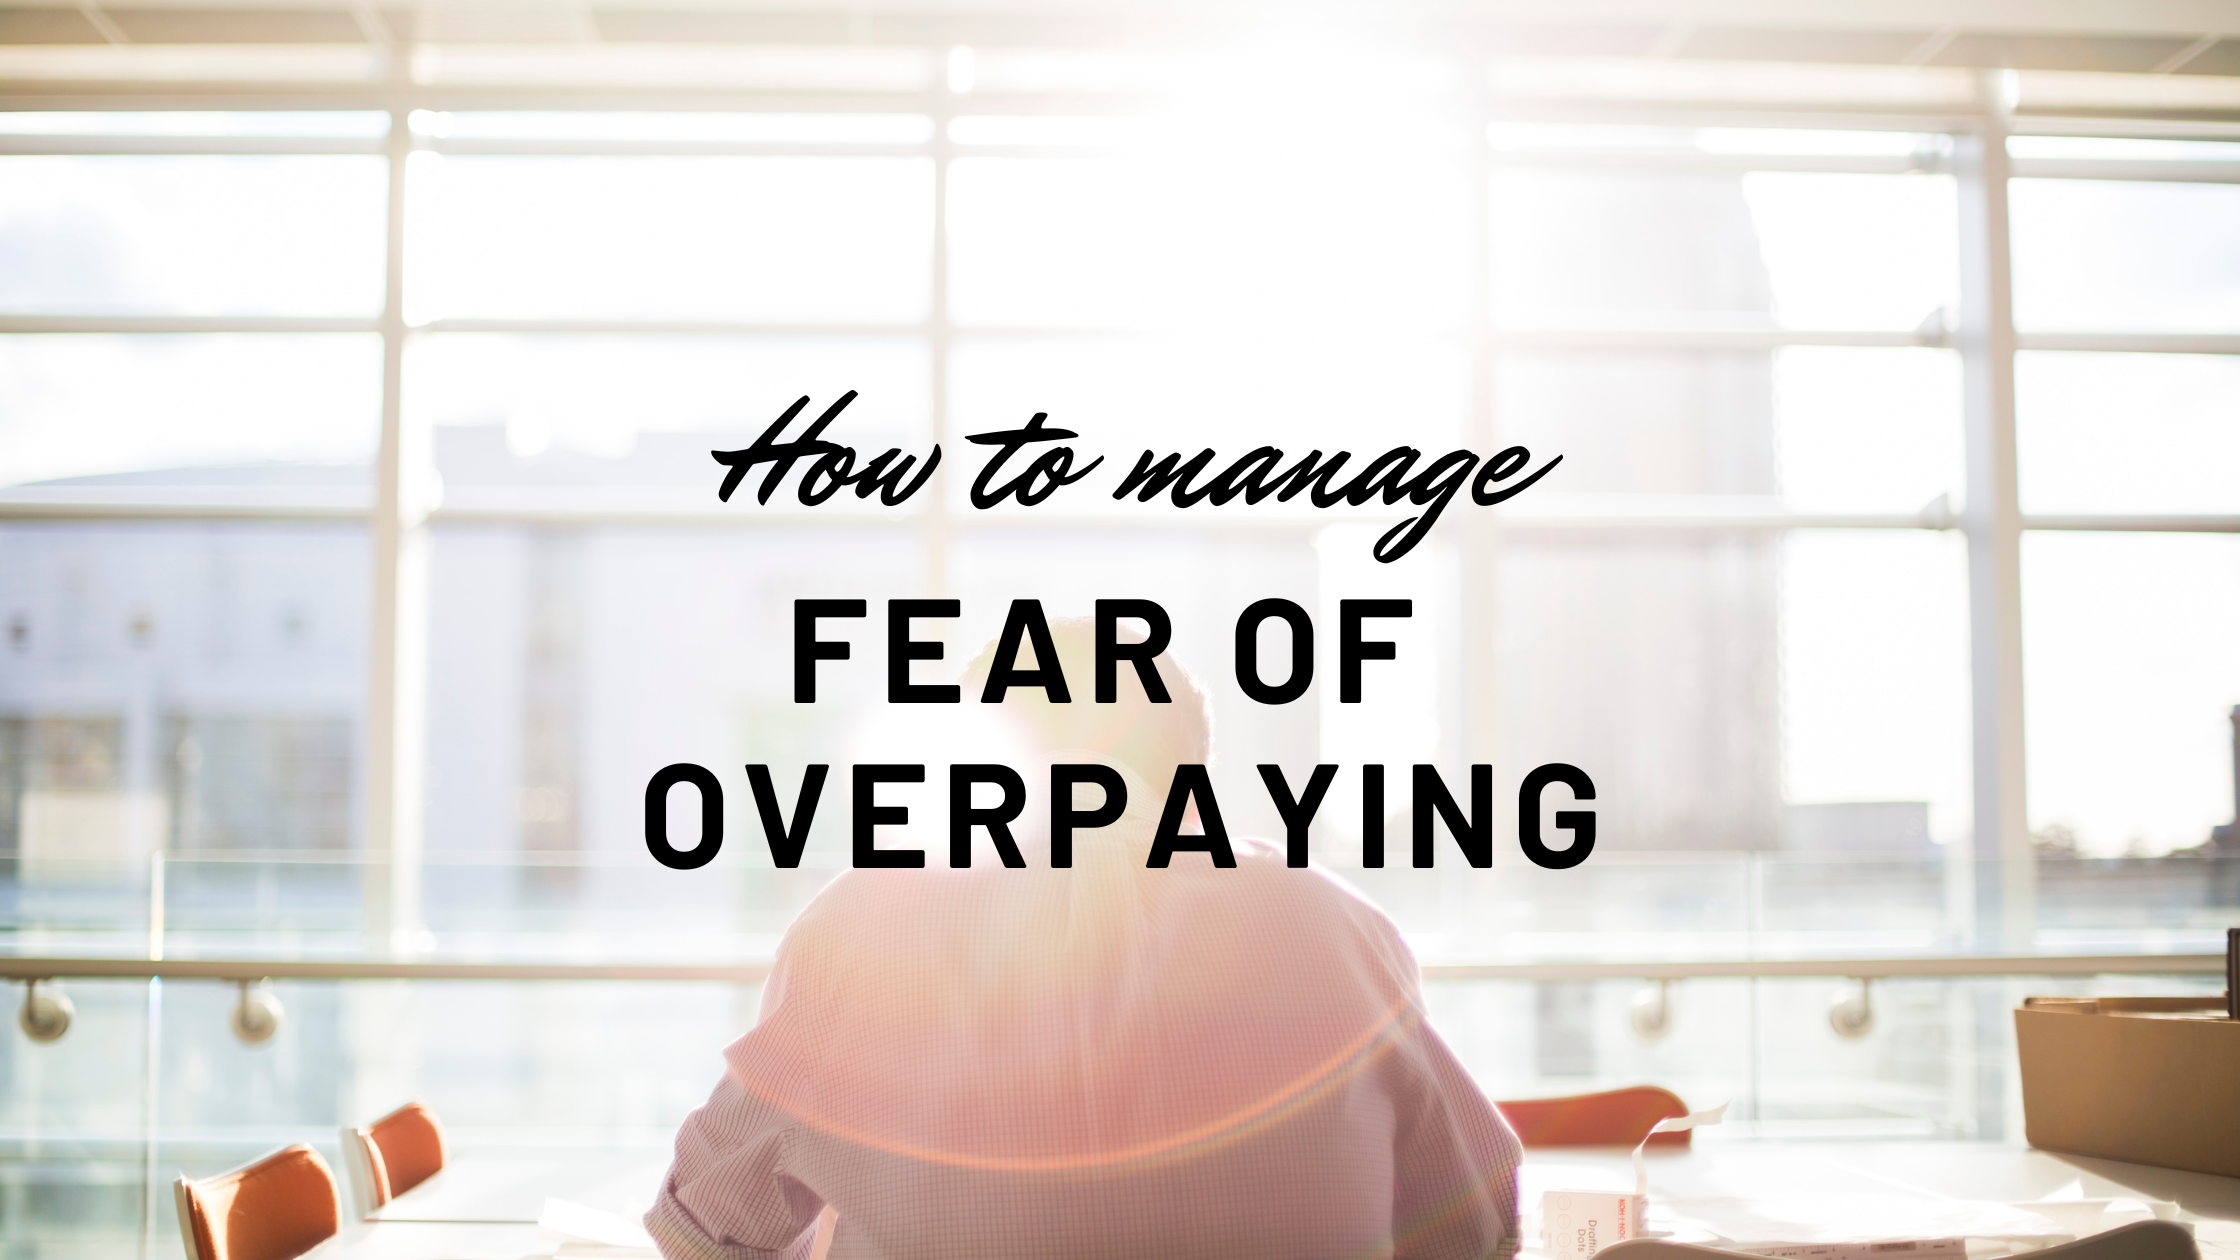 How to manage fear of overpaying when buying a home